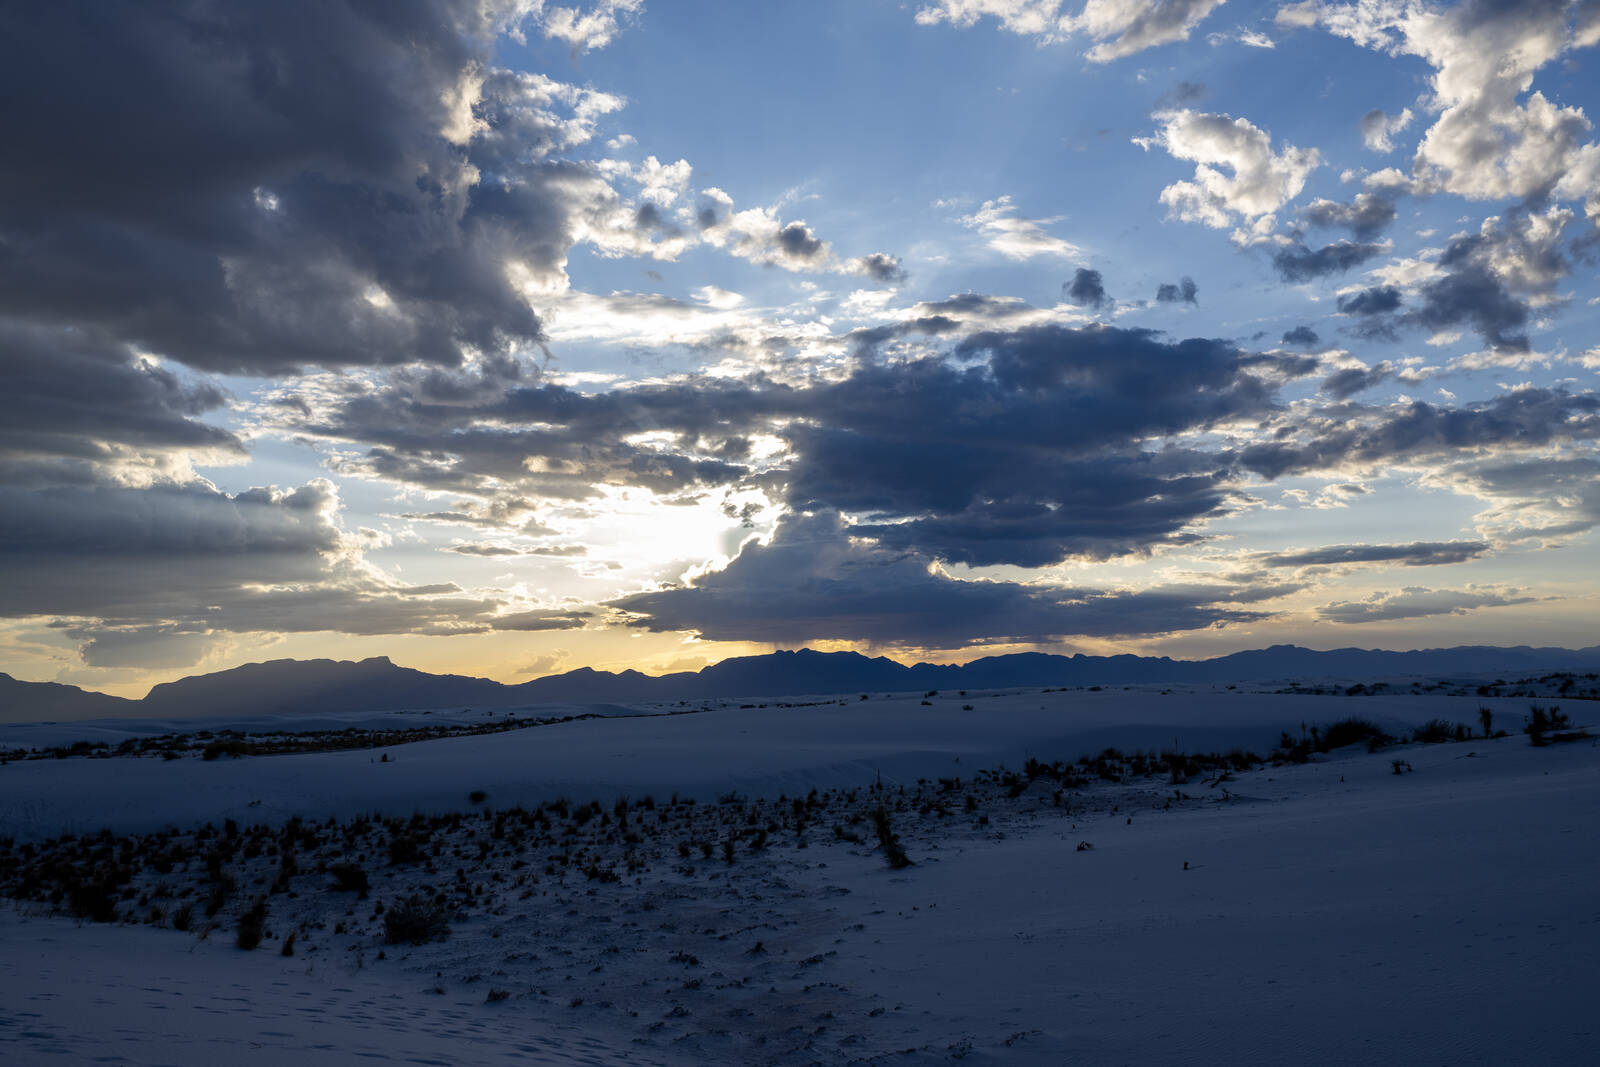 Image of White Sands National Park by Jared Helgerson